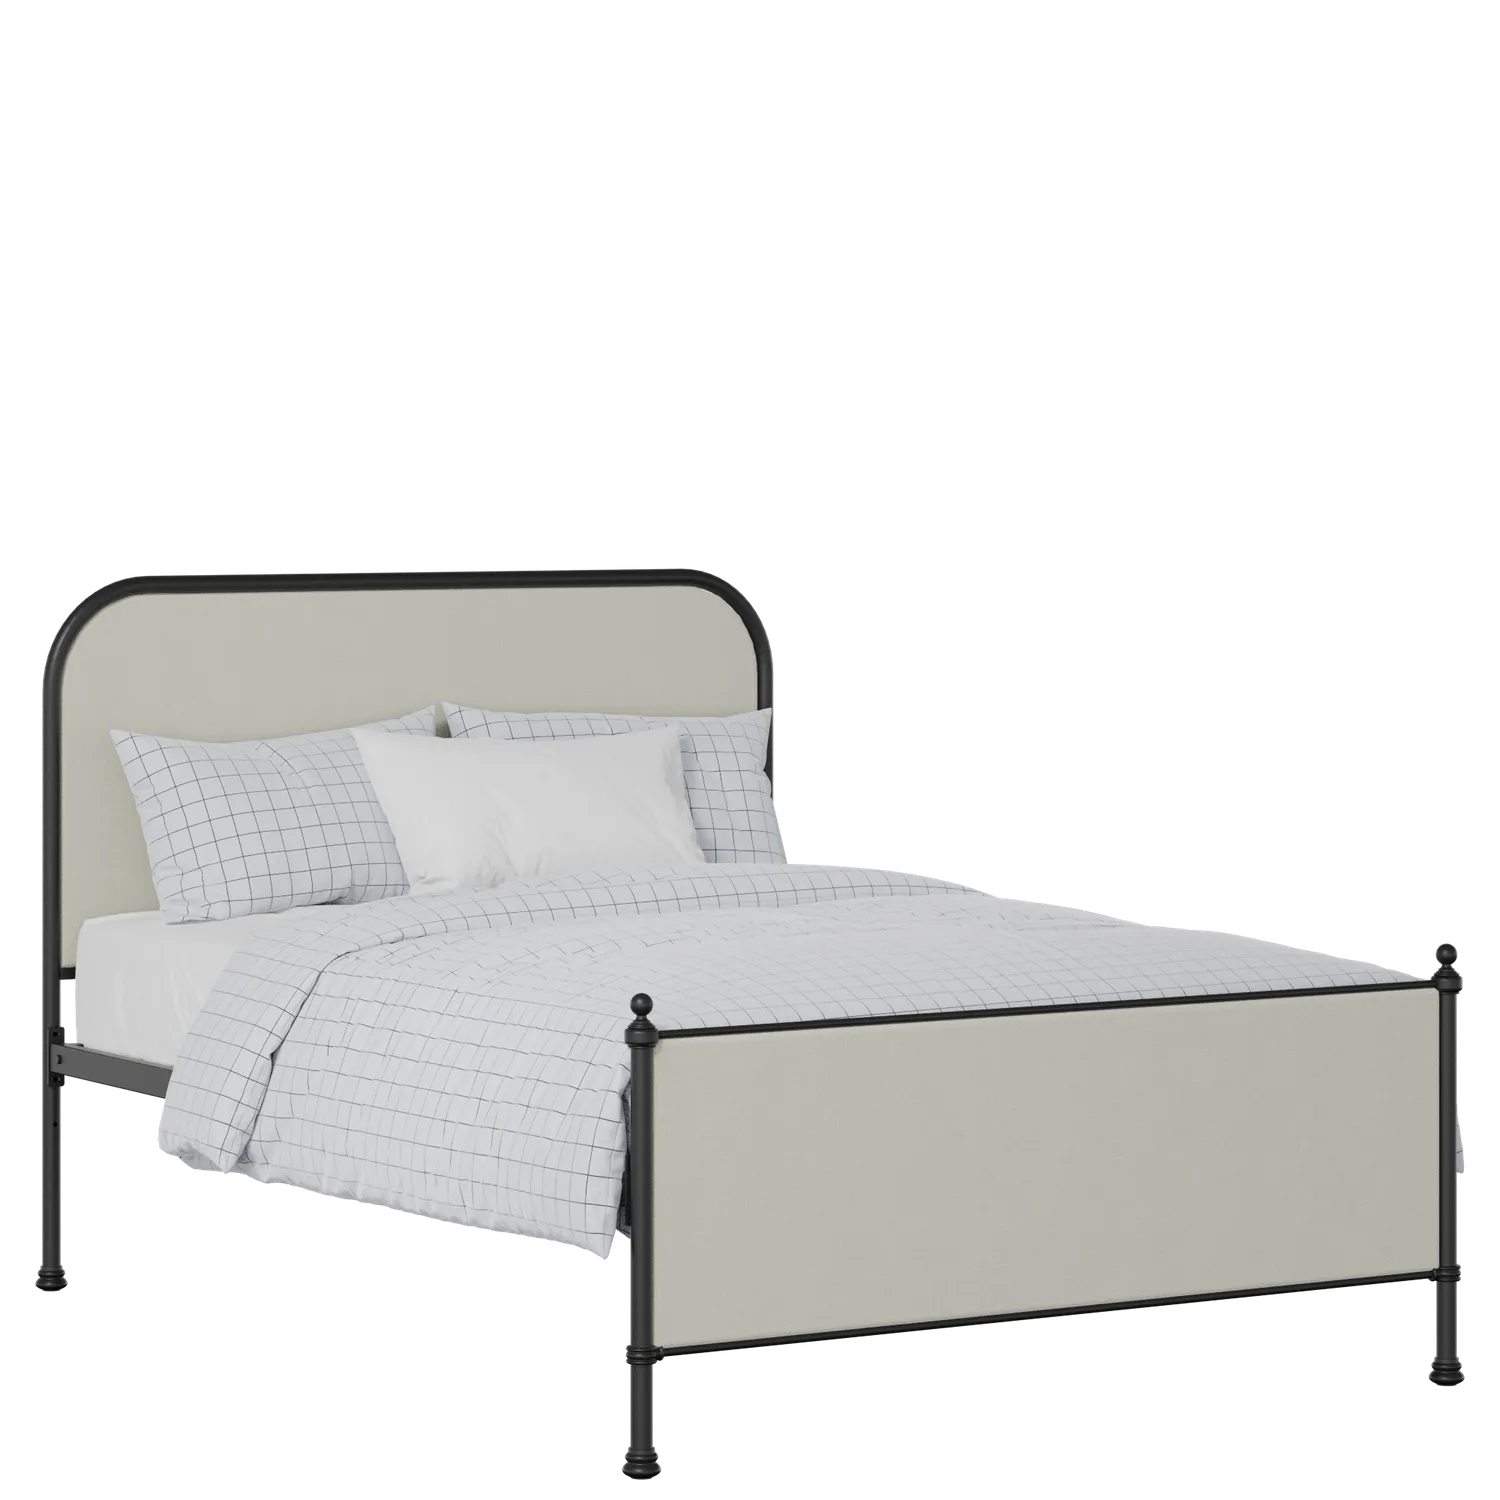 Bray iron/metal upholstered bed in black with oatmeal fabric